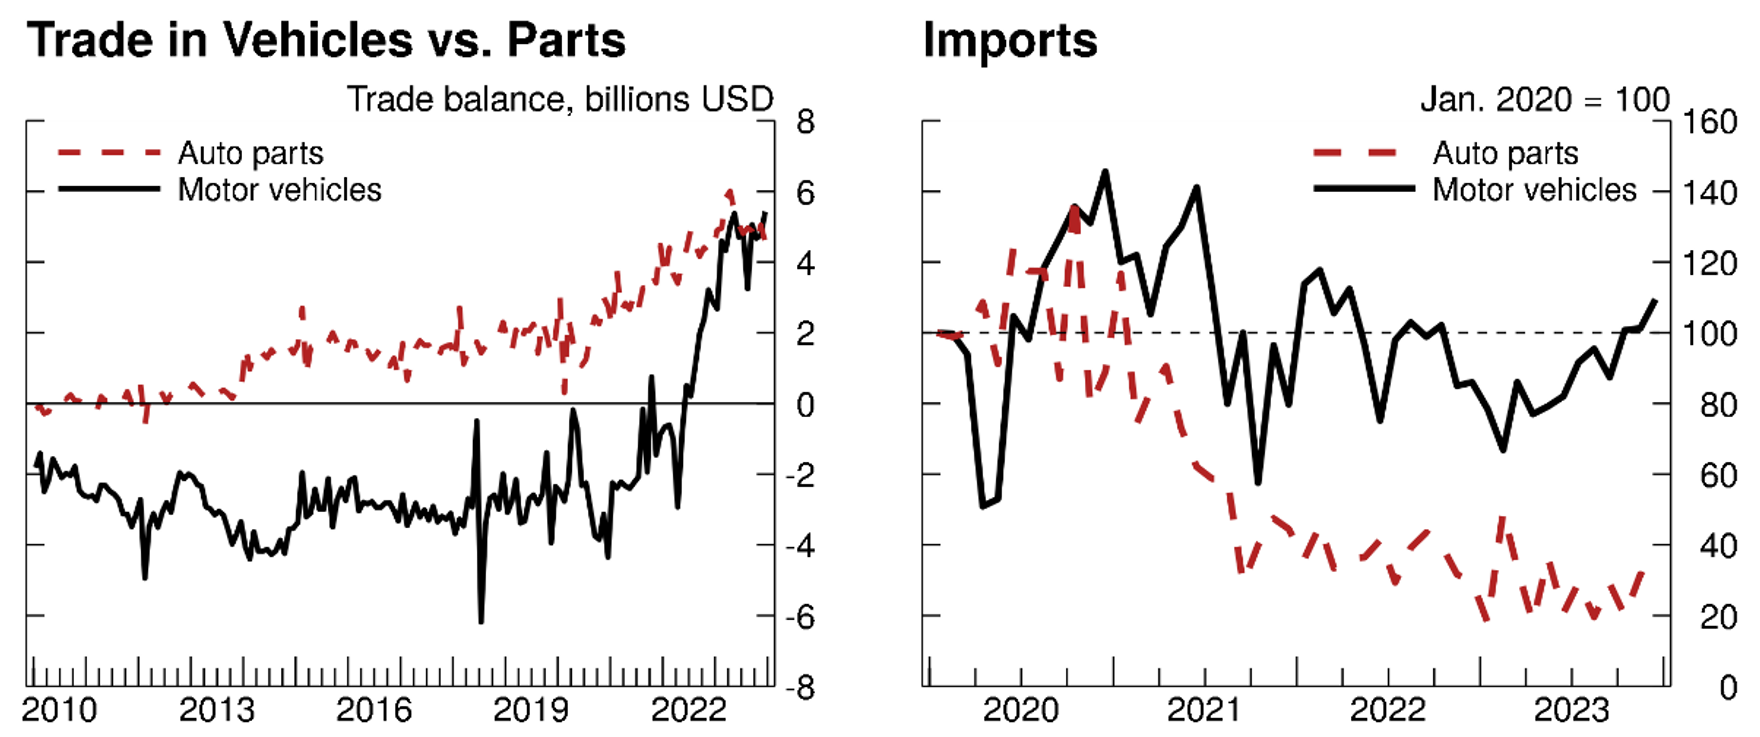 Figure 7. Evolution of trade in auto parts and motor vehicles. See accessible link for data.